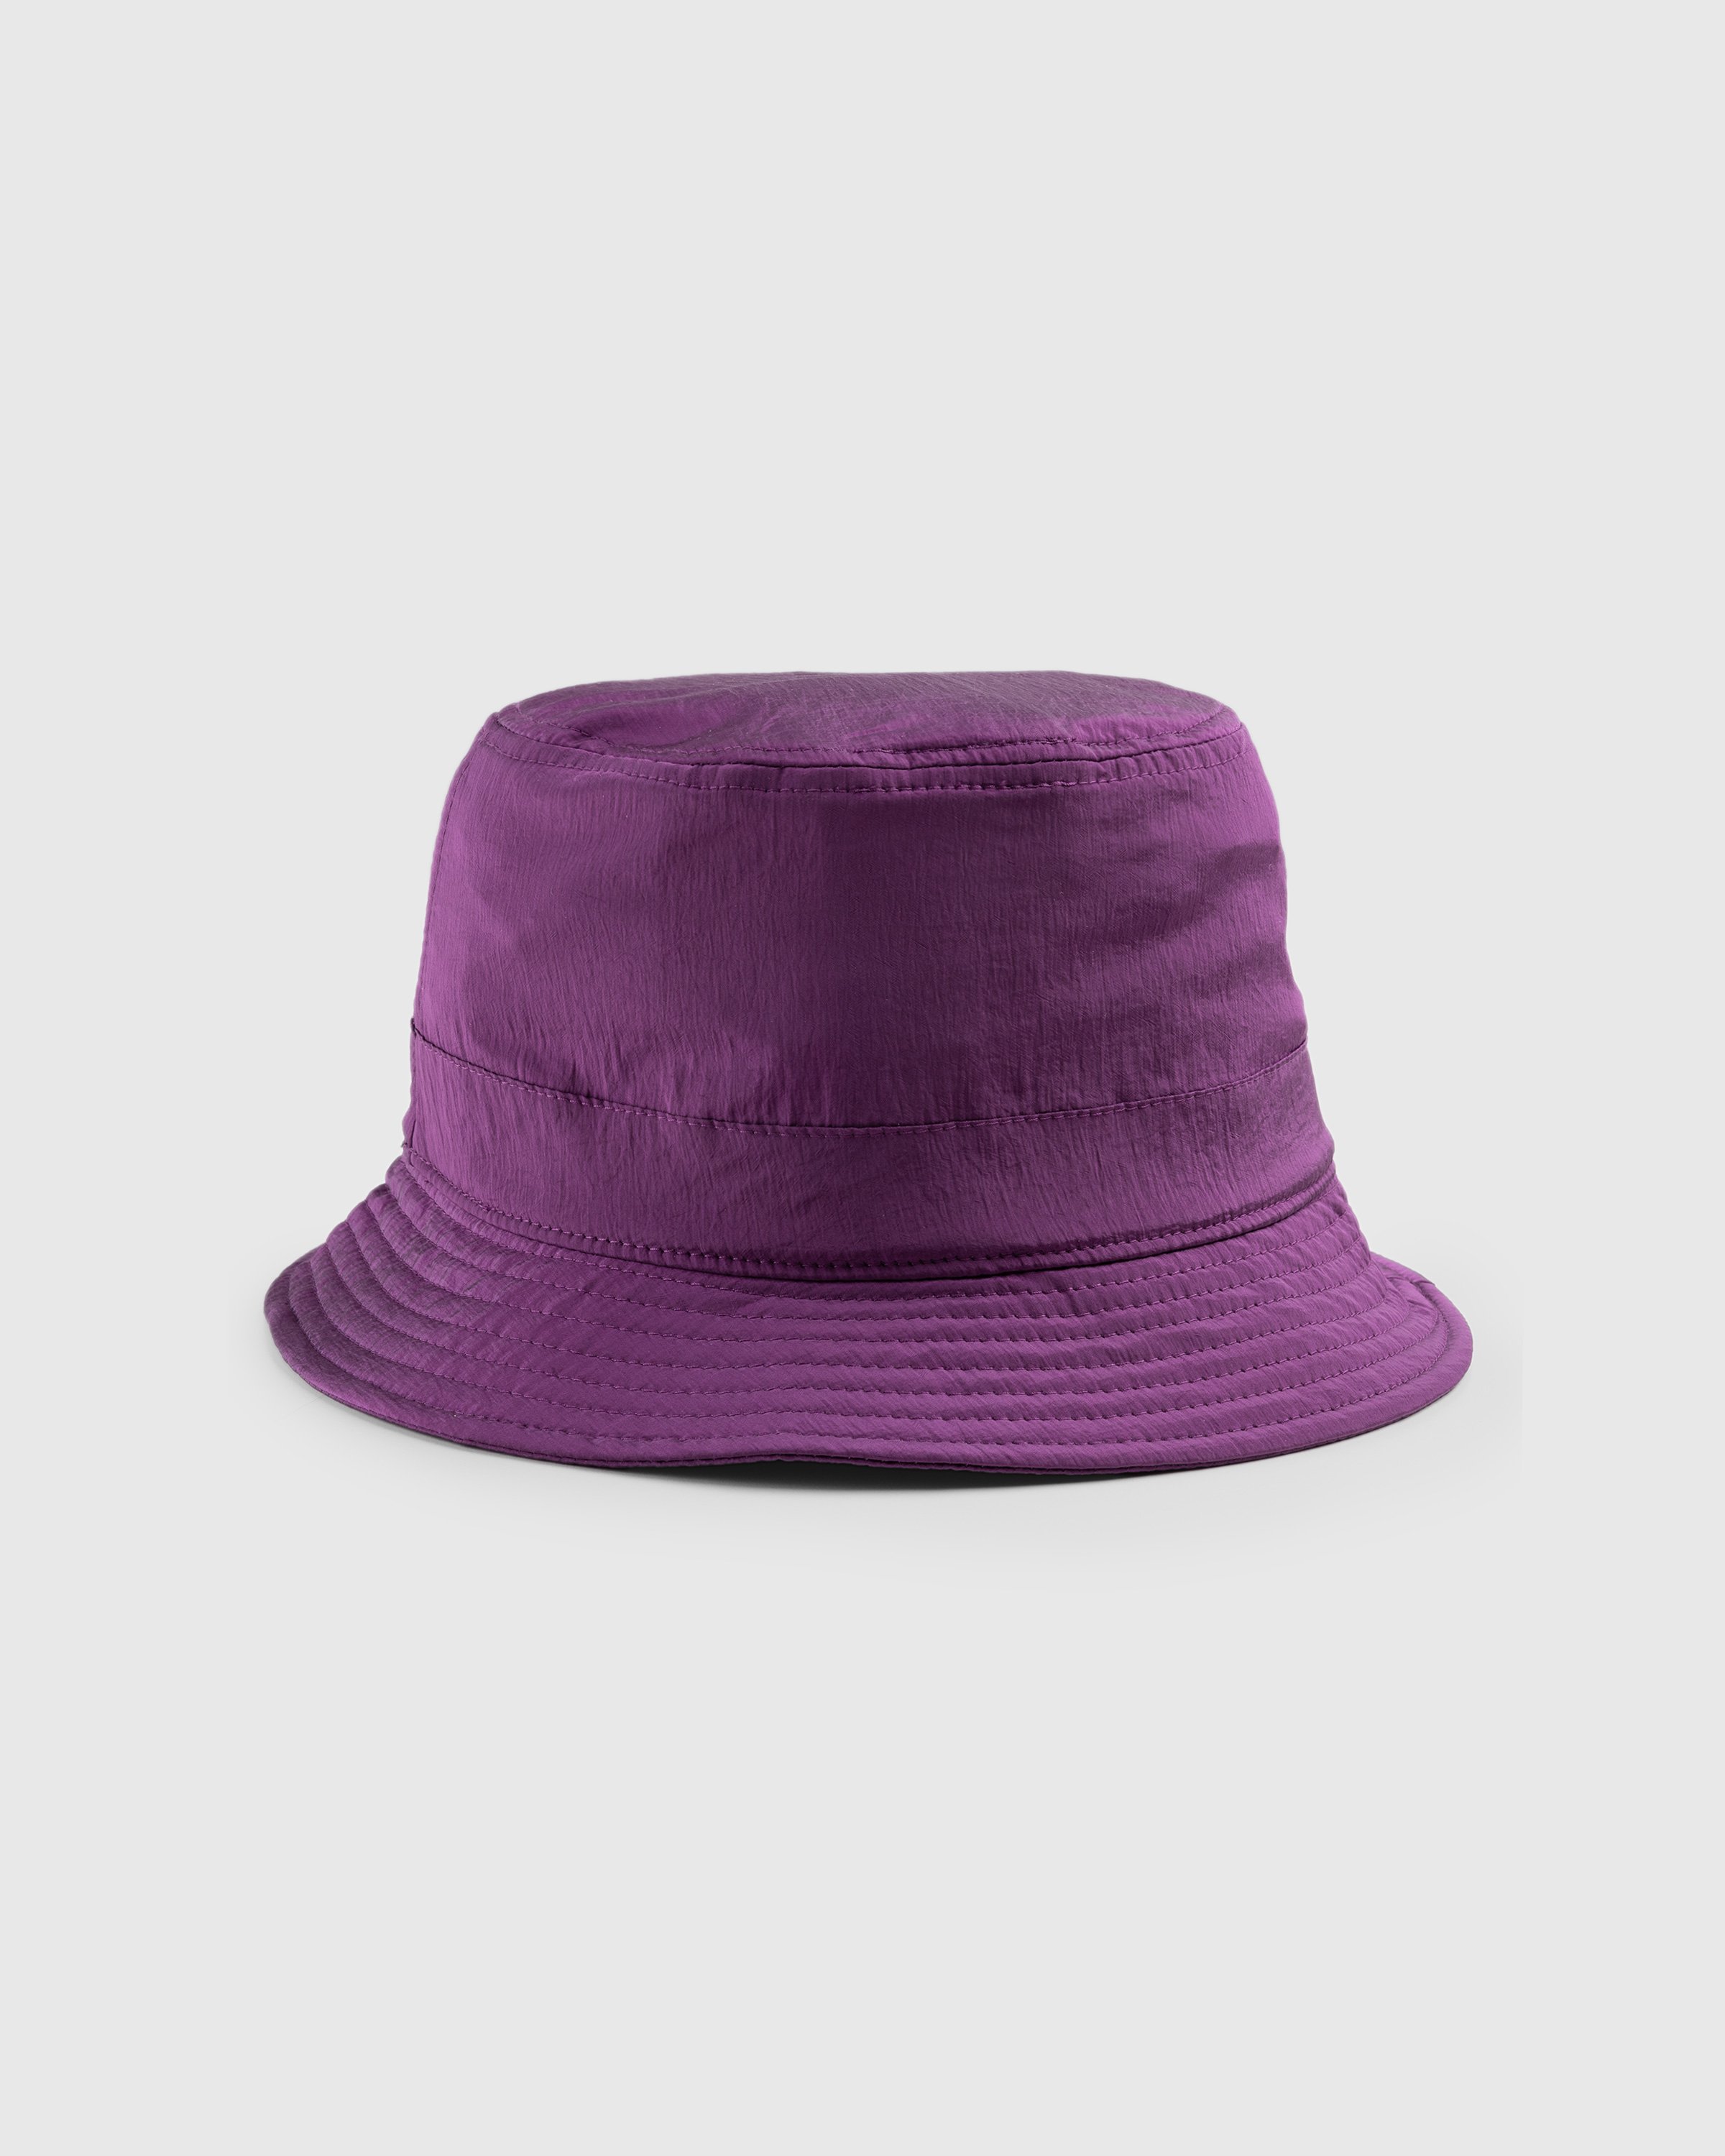 Stone Island - Cappello Pink 781599376 - Accessories - Pink - Image 2